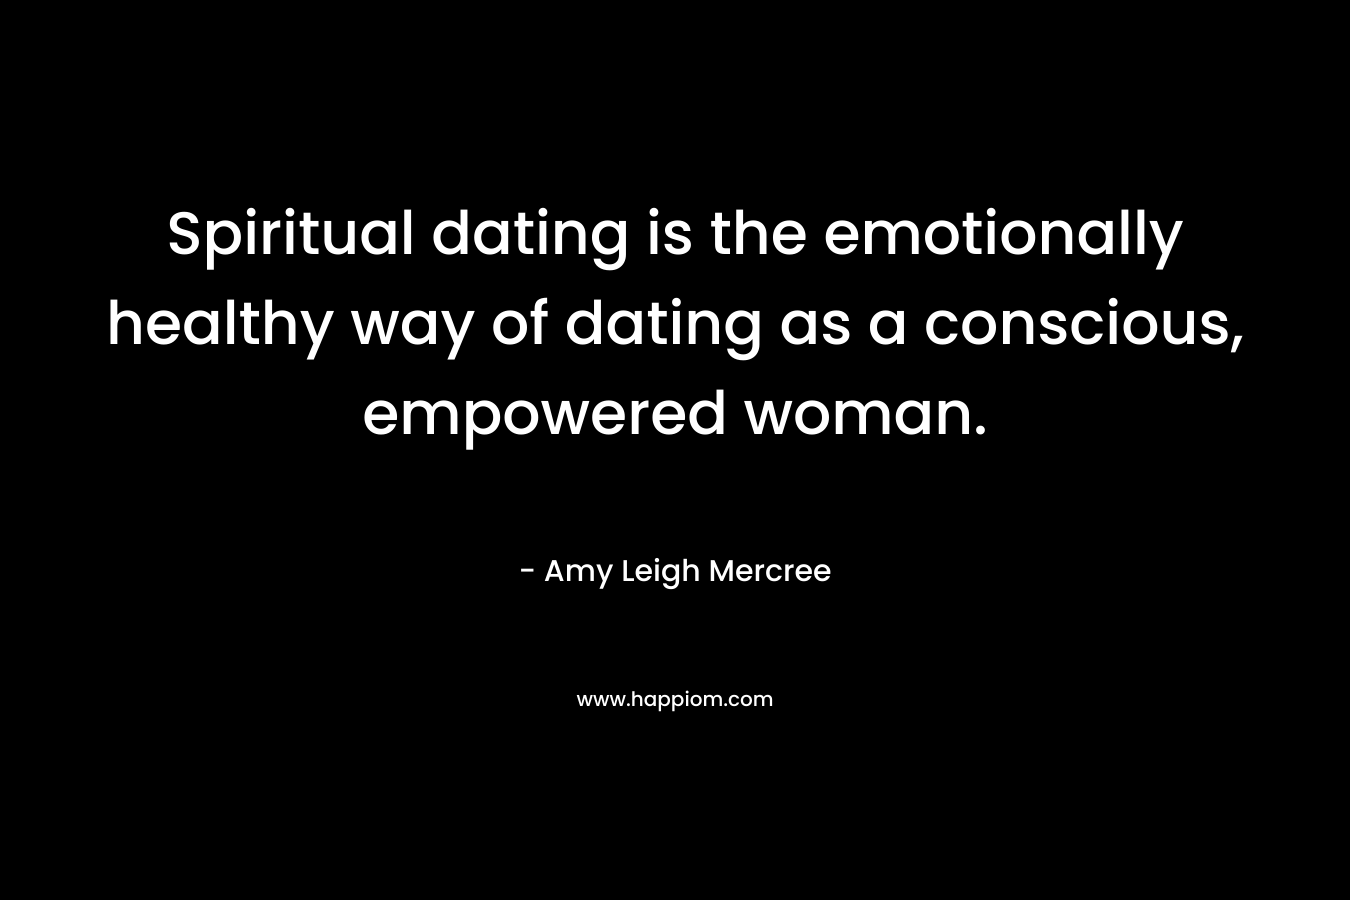 Spiritual dating is the emotionally healthy way of dating as a conscious, empowered woman. – Amy Leigh Mercree